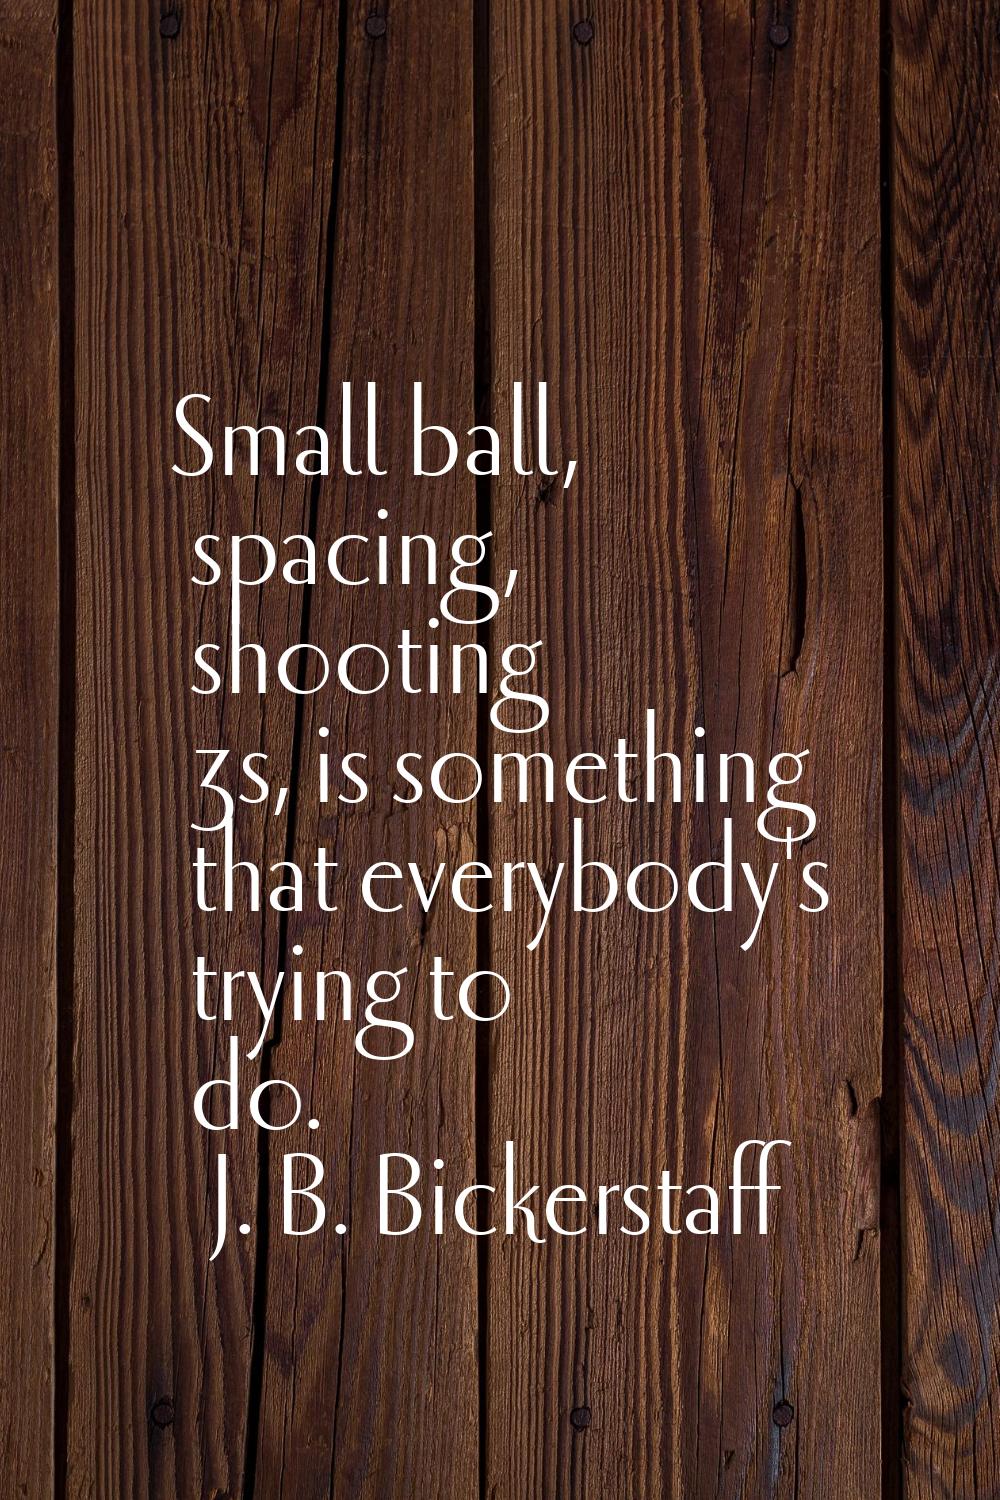 Small ball, spacing, shooting 3s, is something that everybody's trying to do.